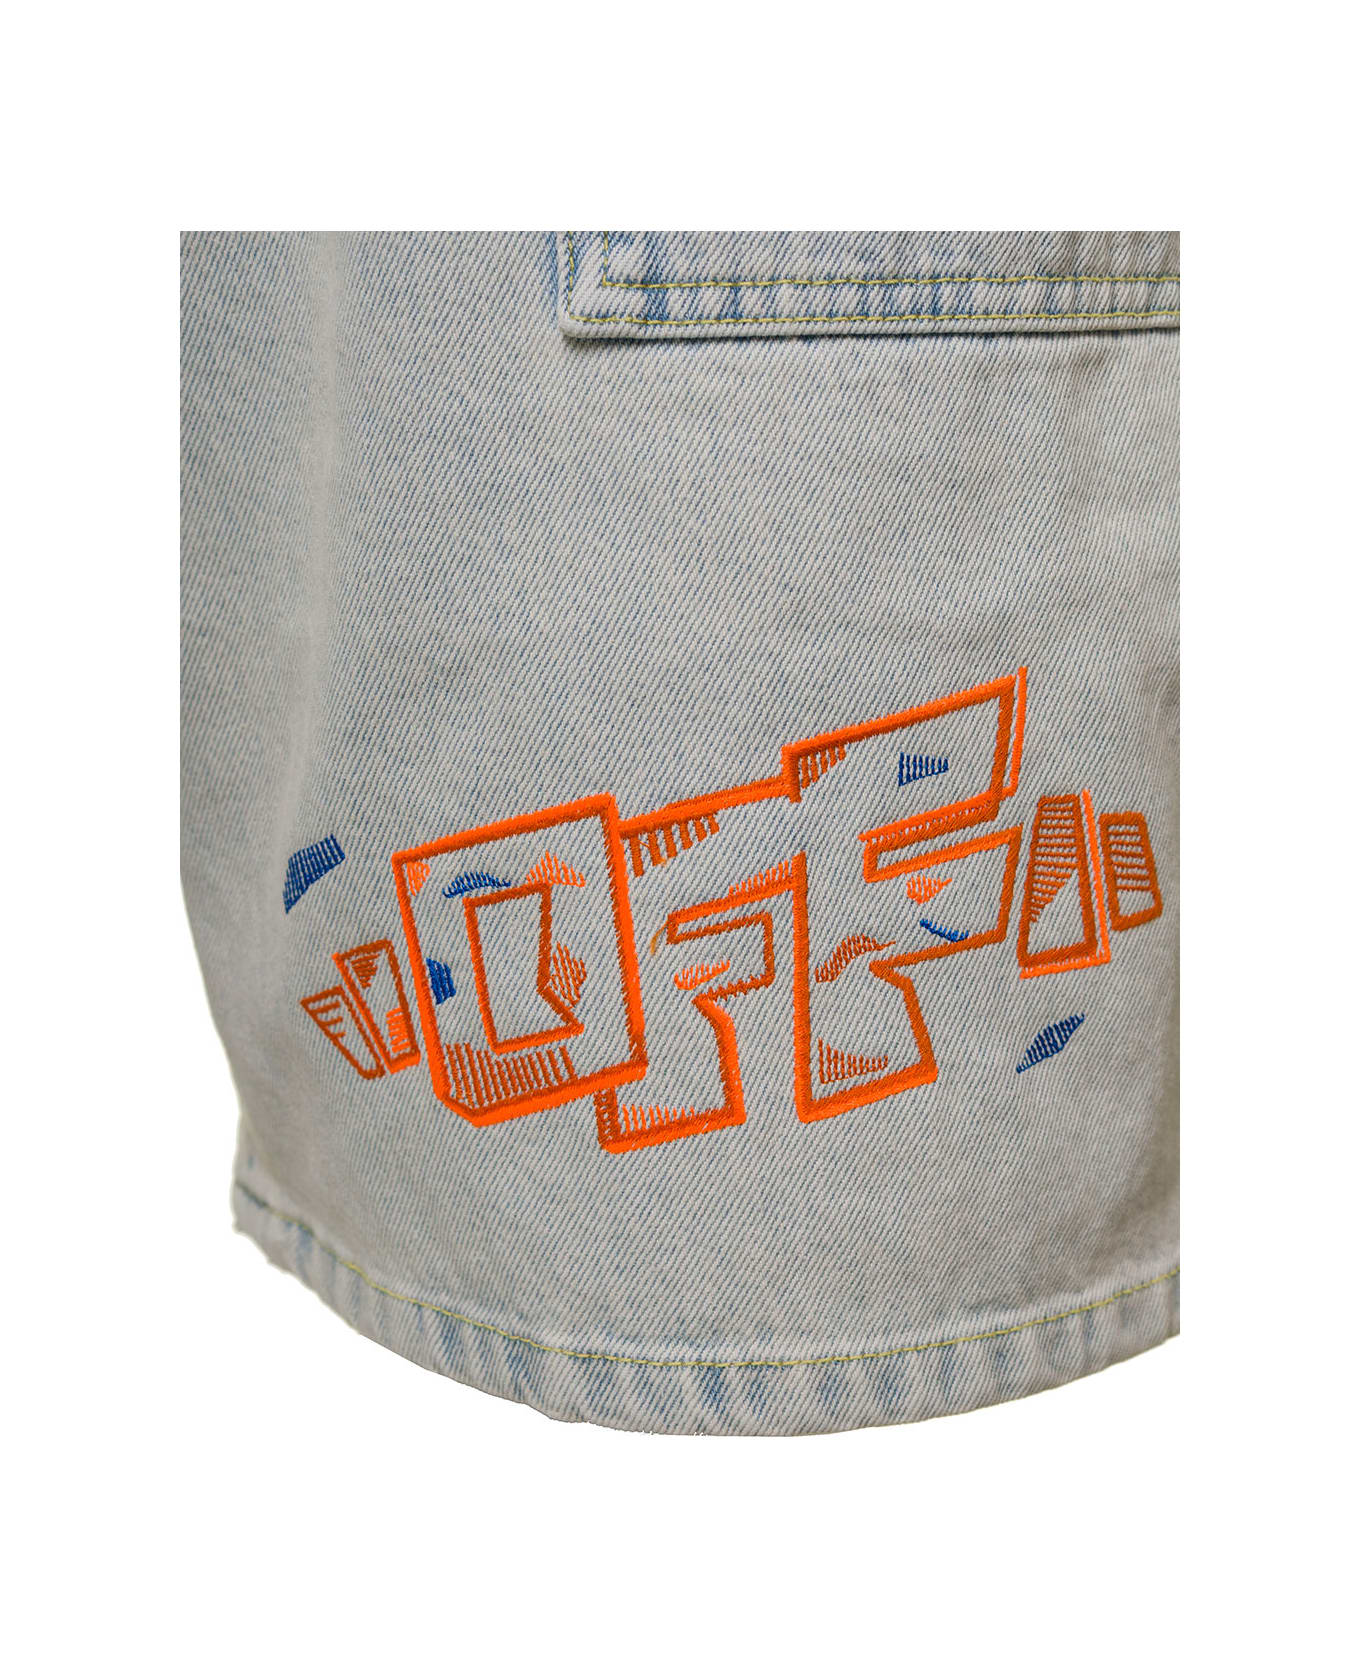 Off-White Light Blue Shorts With Logo Embroidery At The Front In Cotton Denim Man - Light blue